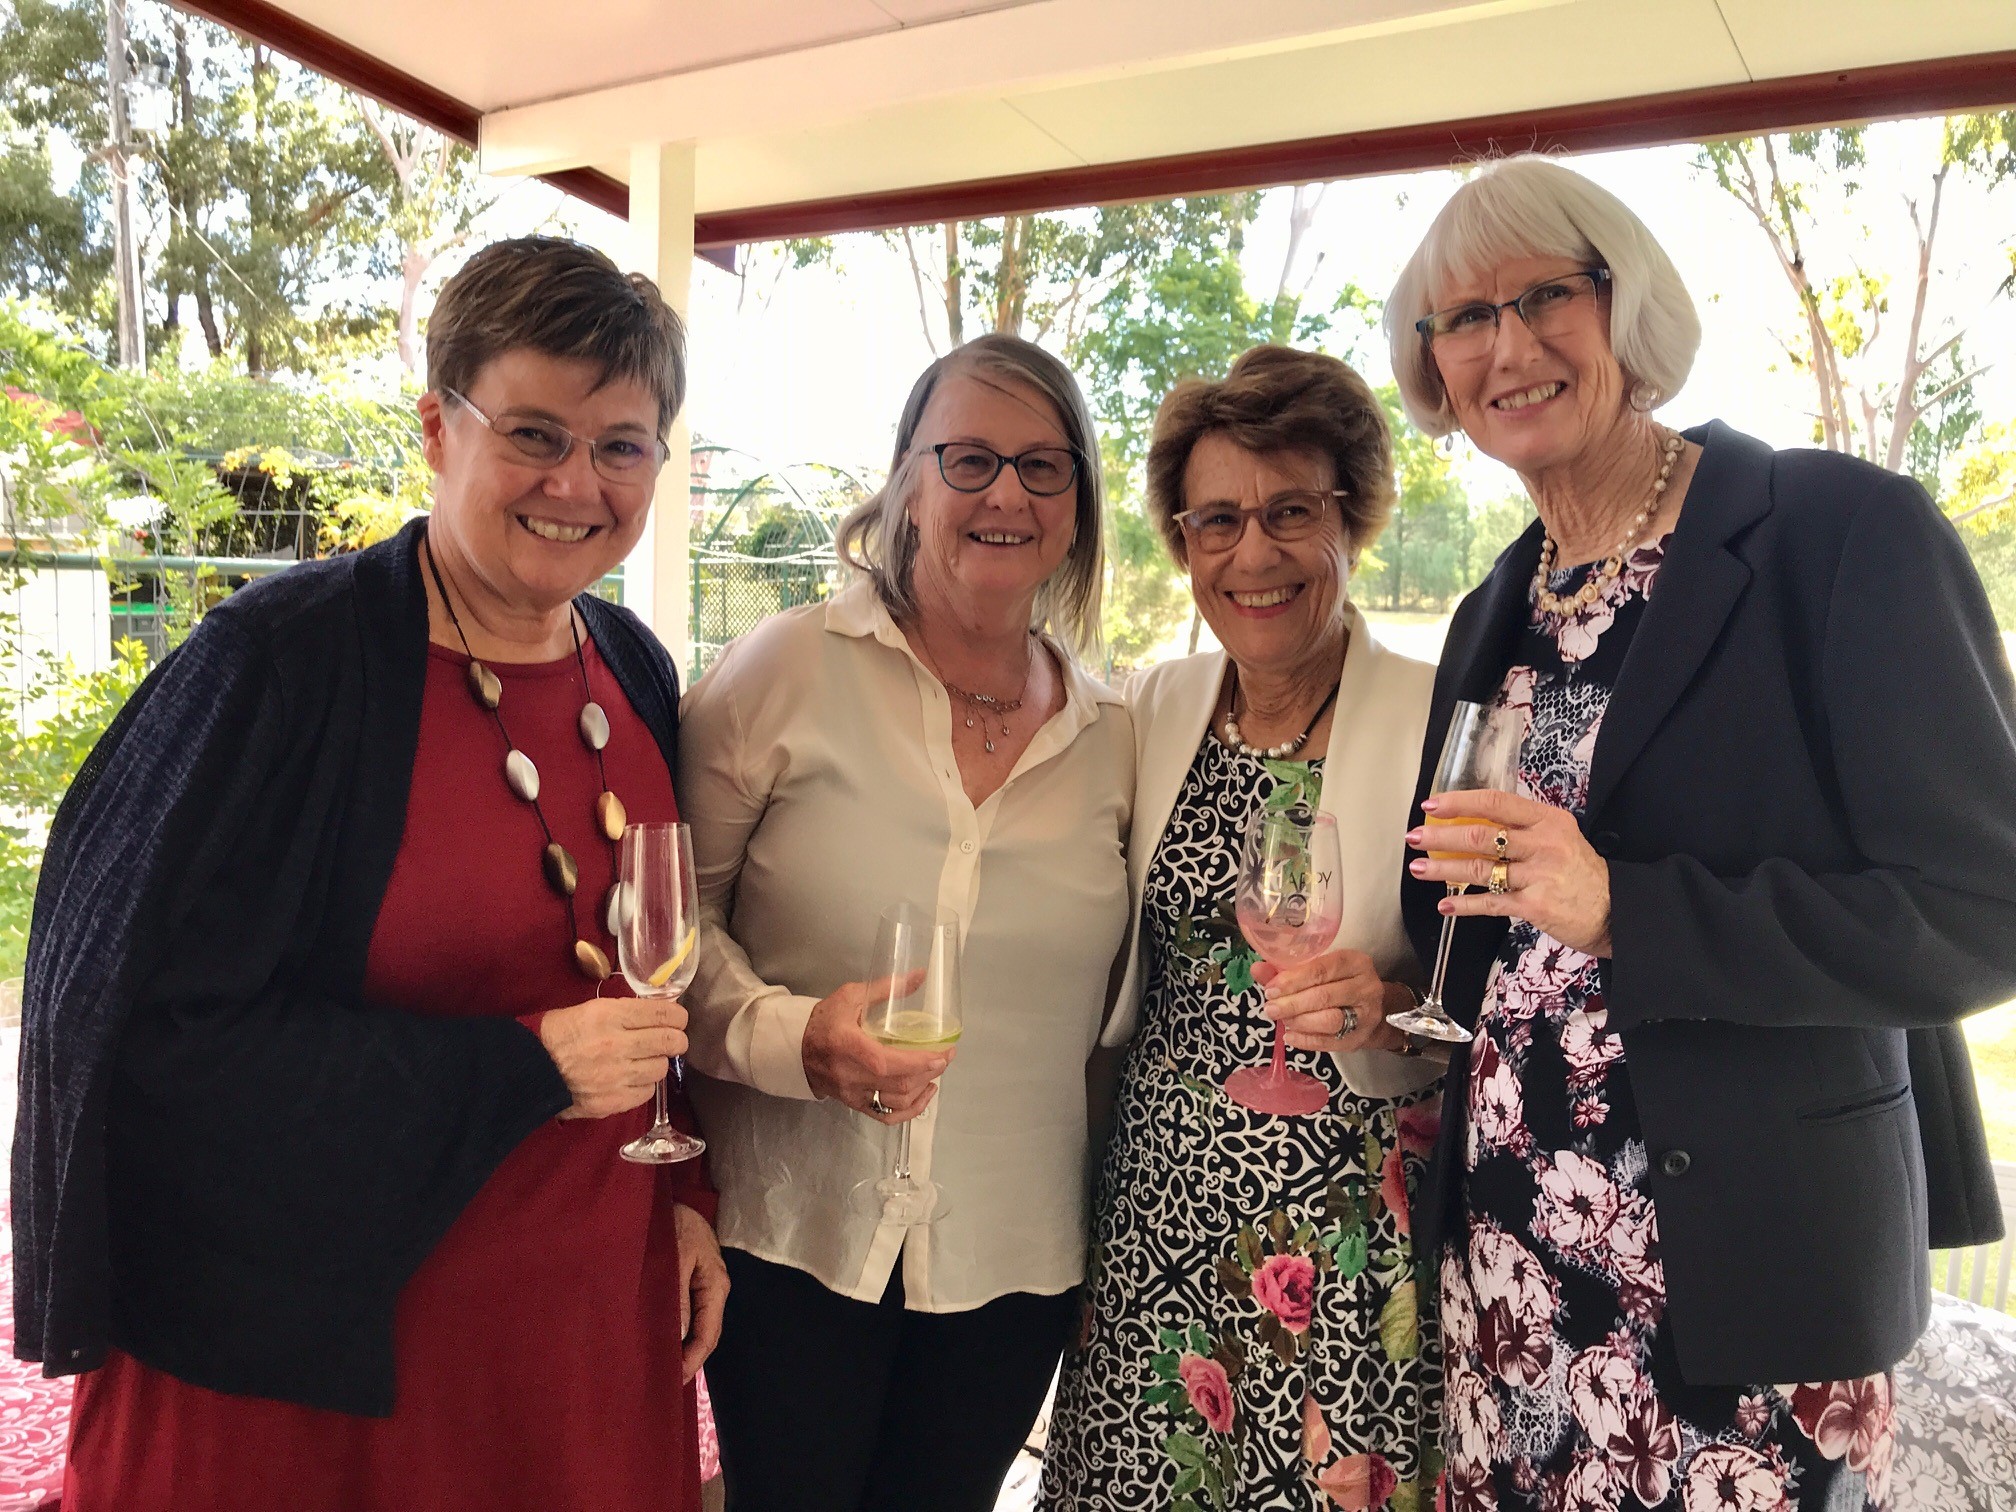 The ‘Bethungra Belles’ party: Lyn Firth, Maree Tann, Jacqui Warnock and Gail Eulenstein.